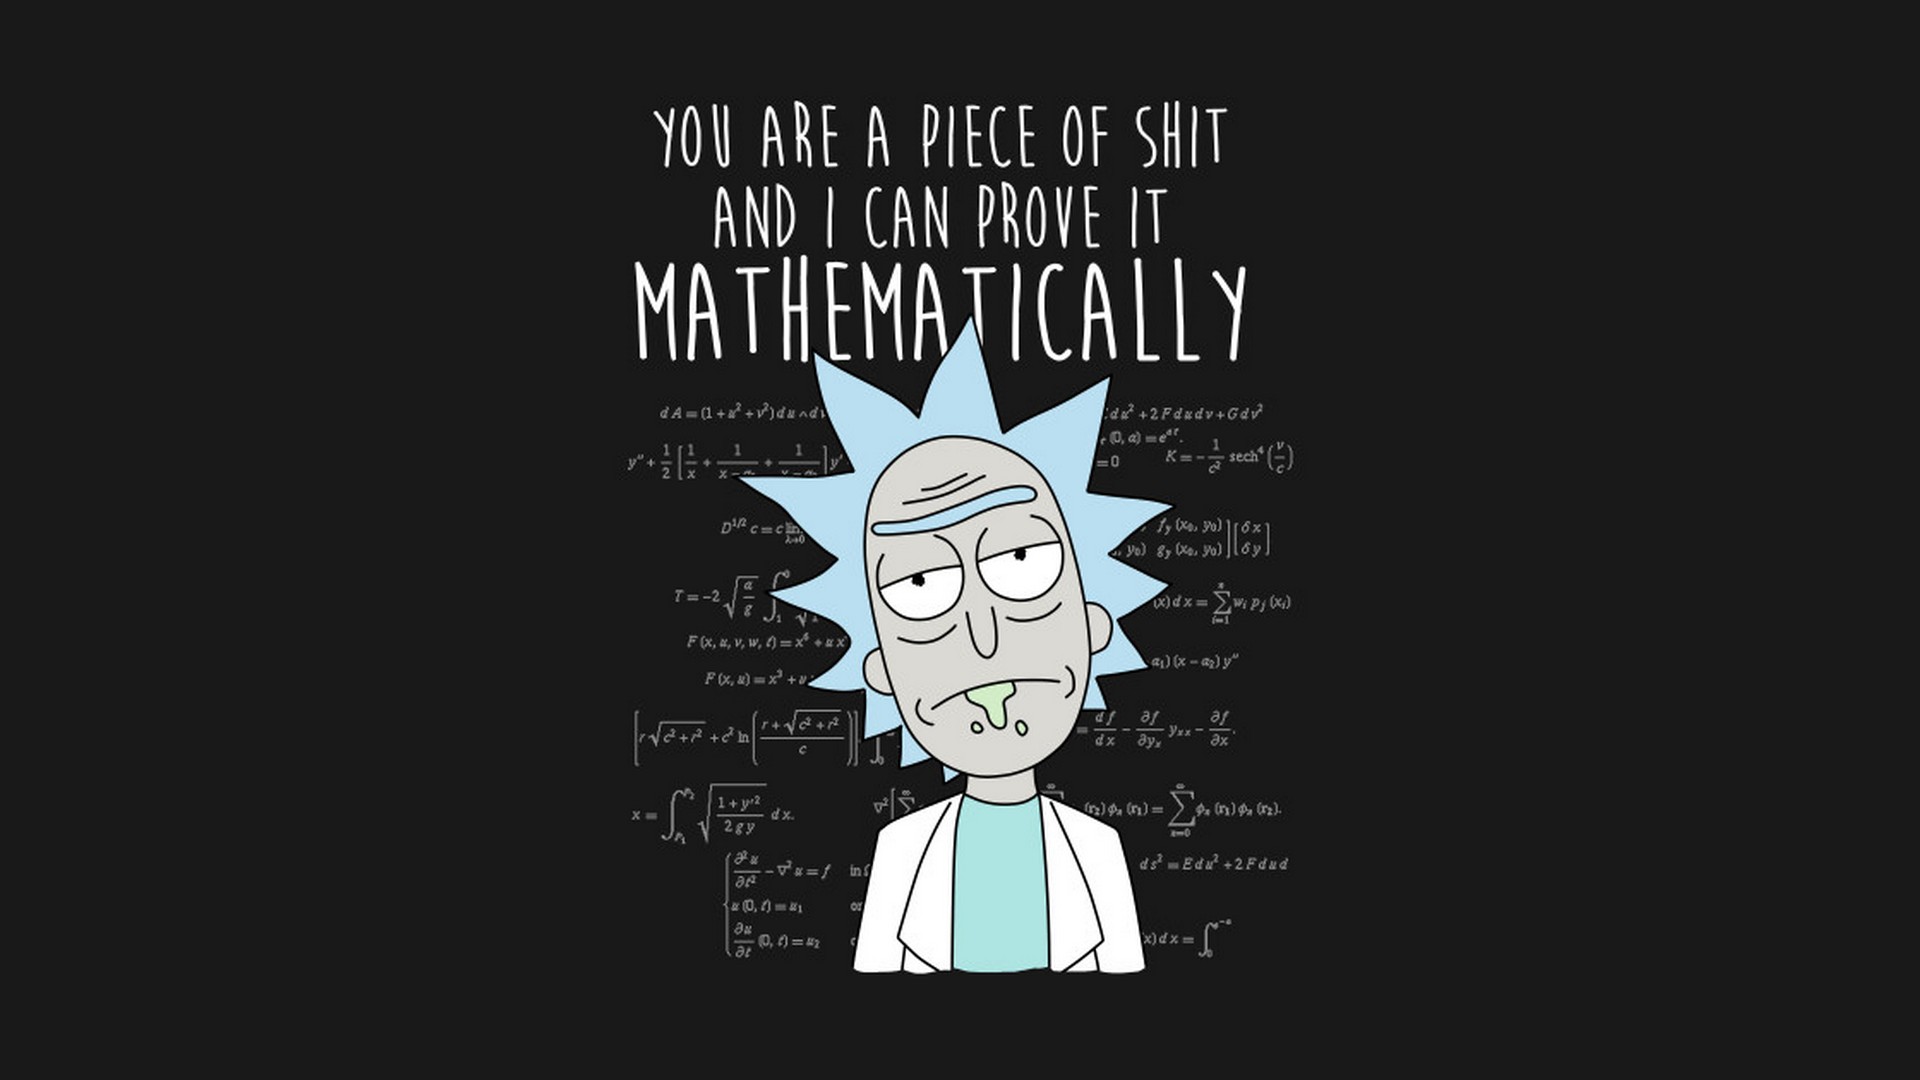 Rick and Morty Rick Desktop Wallpaper with image resolution 1920x1080 pixel. You can use this wallpaper as background for your desktop Computer Screensavers, Android or iPhone smartphones